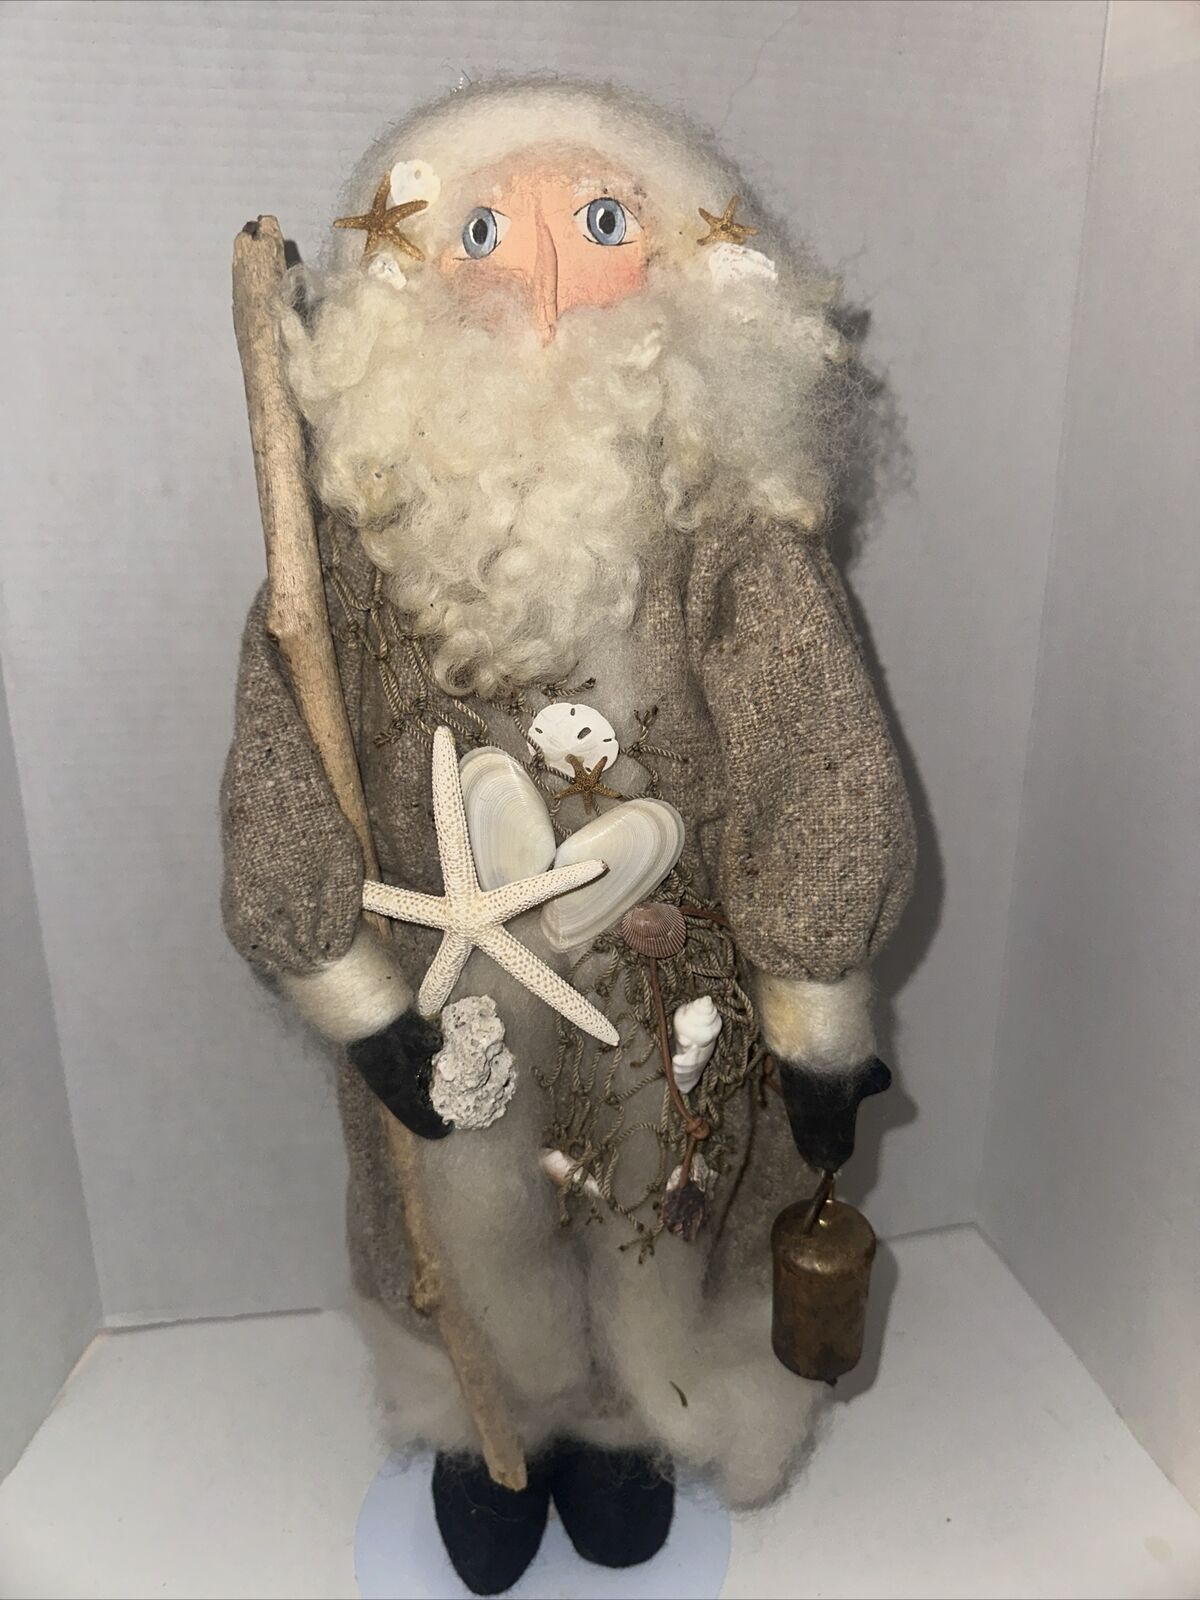 The Coastal Christmas Santa Claus, with Nets, Starfish, and Shells 20” painted f